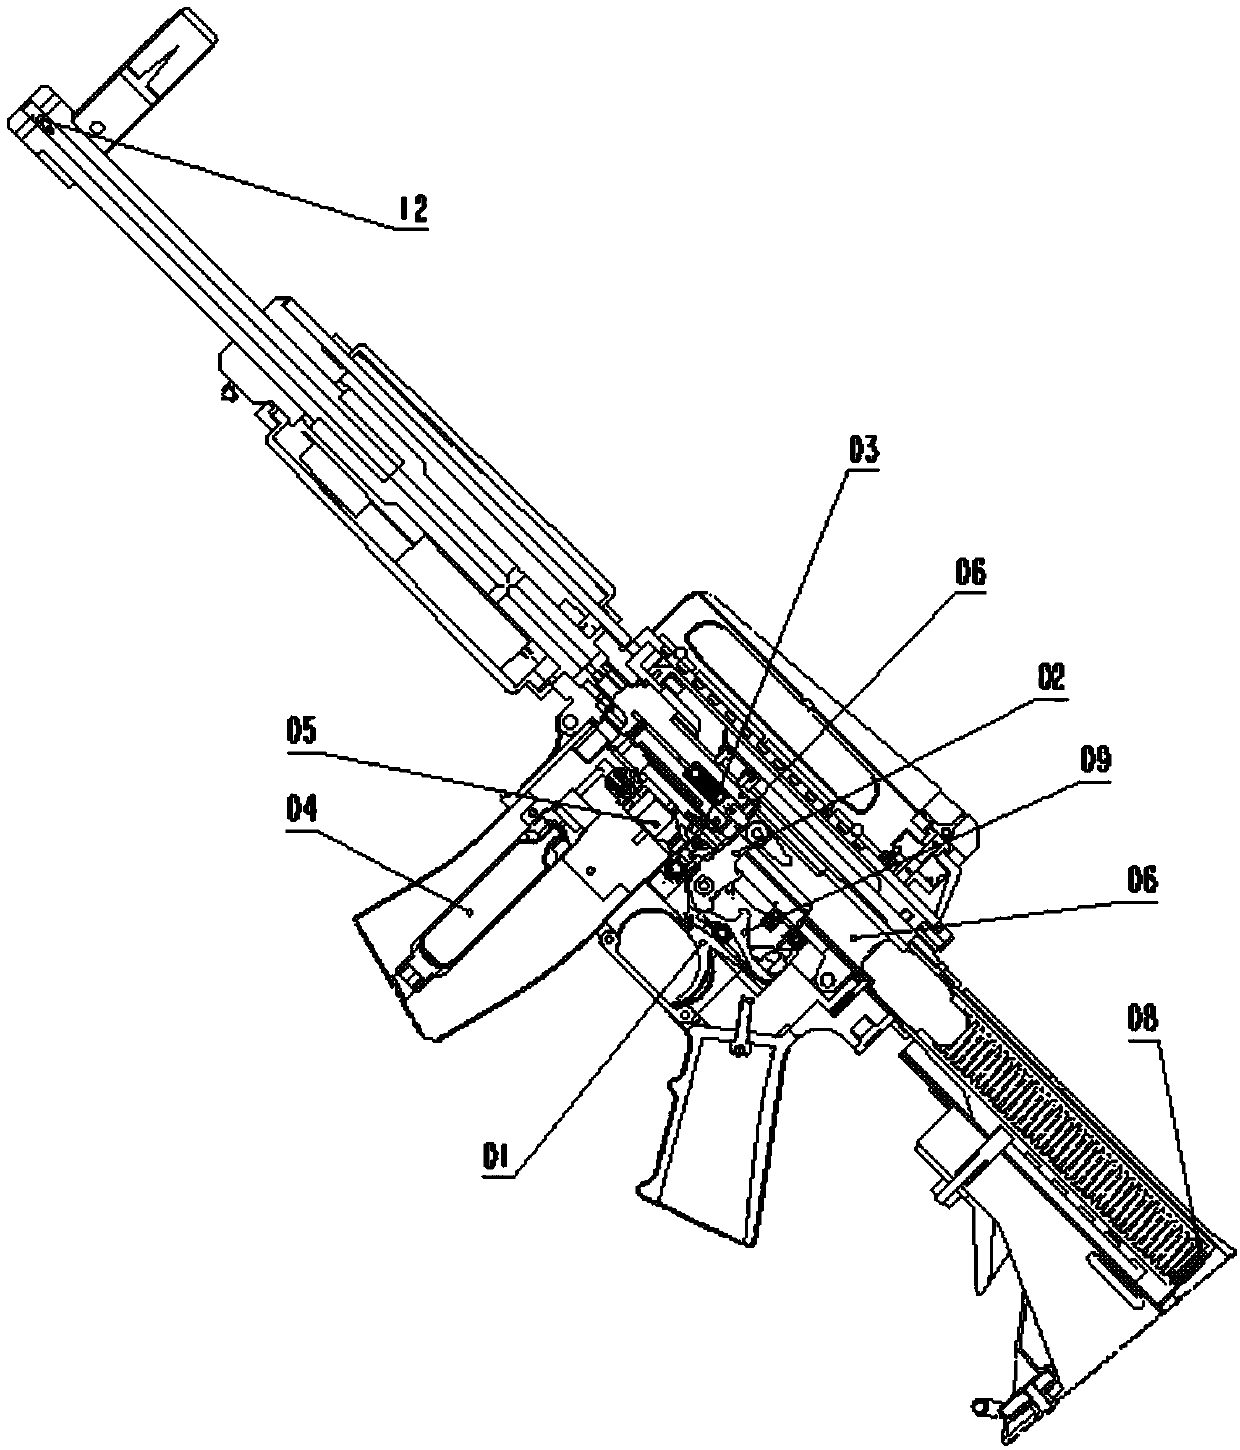 Laser emission gun with recoil force